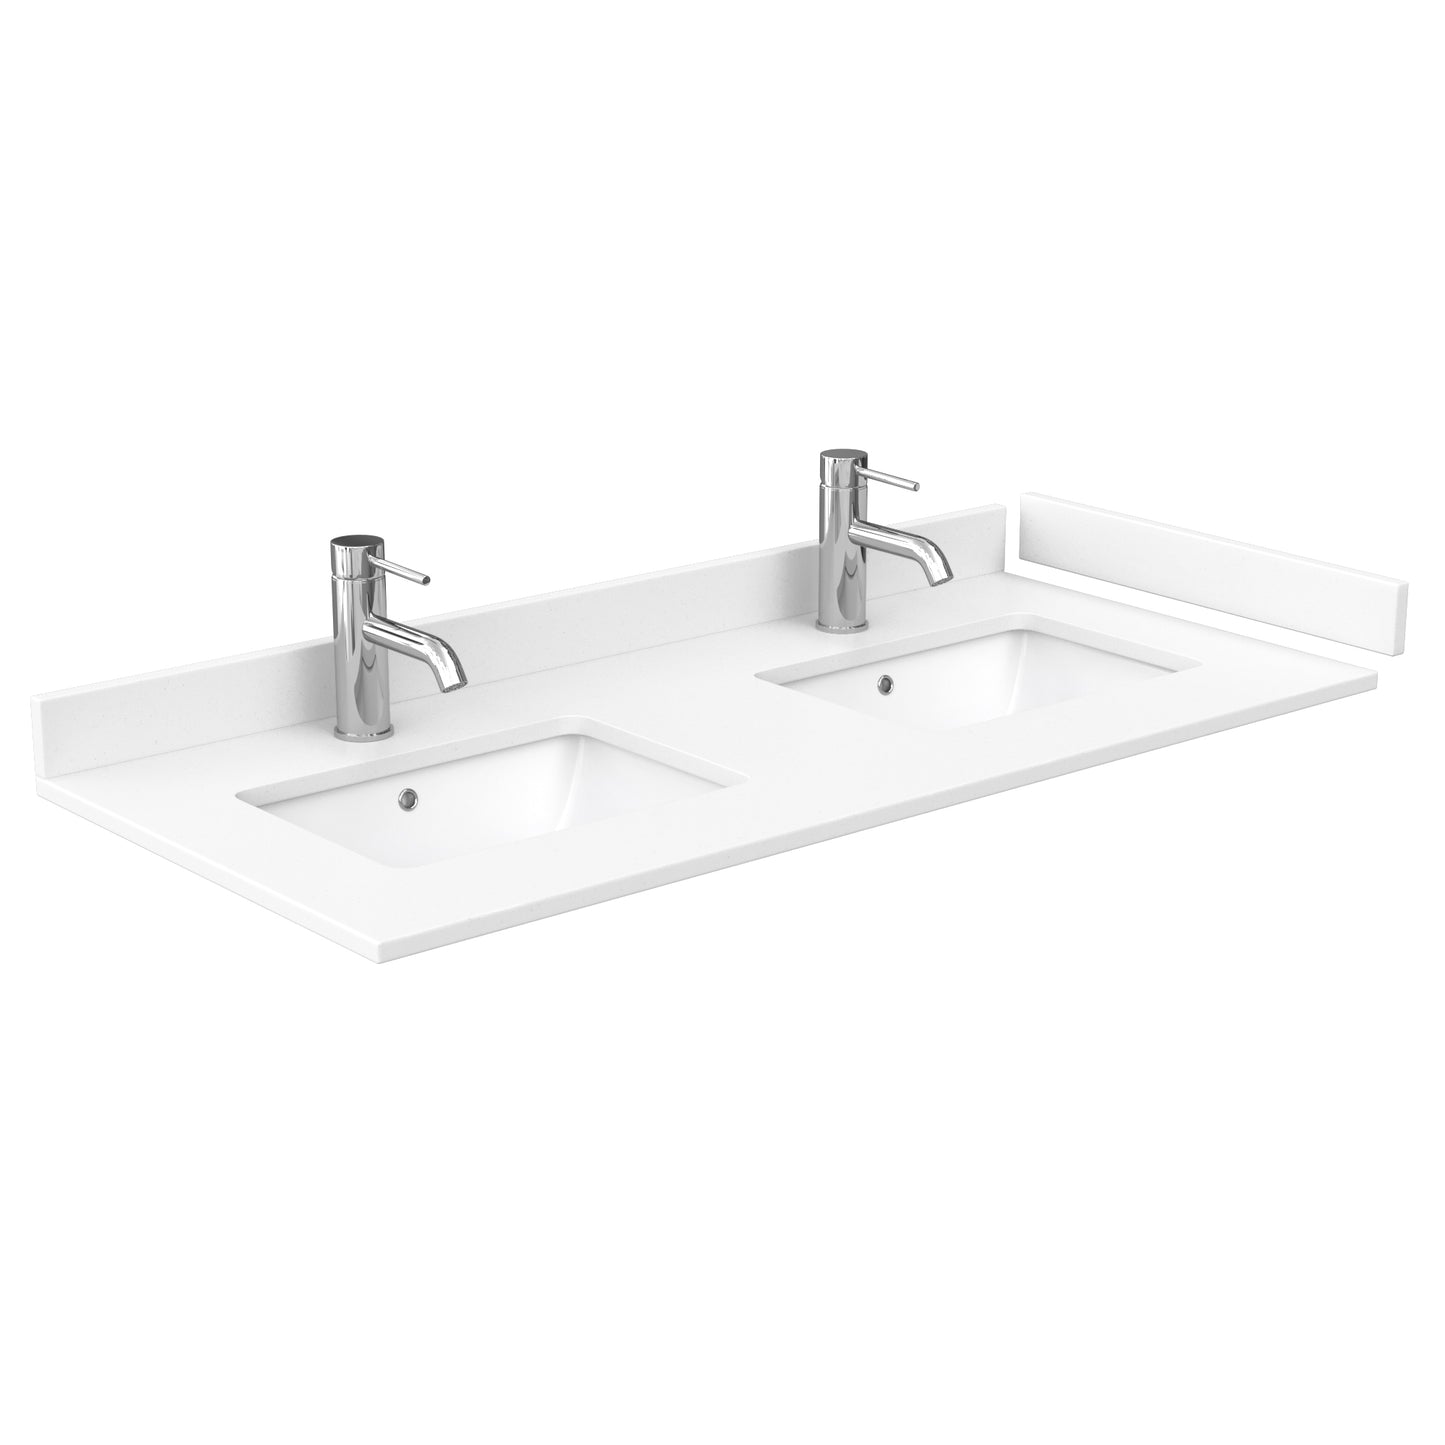 Wyndham Avery 48 Inch Double Bathroom Vanity White Cultured Marble Countertop, Undermount Square Sinks in Matte Black Trim with 46 Inch Mirror - Luxe Bathroom Vanities